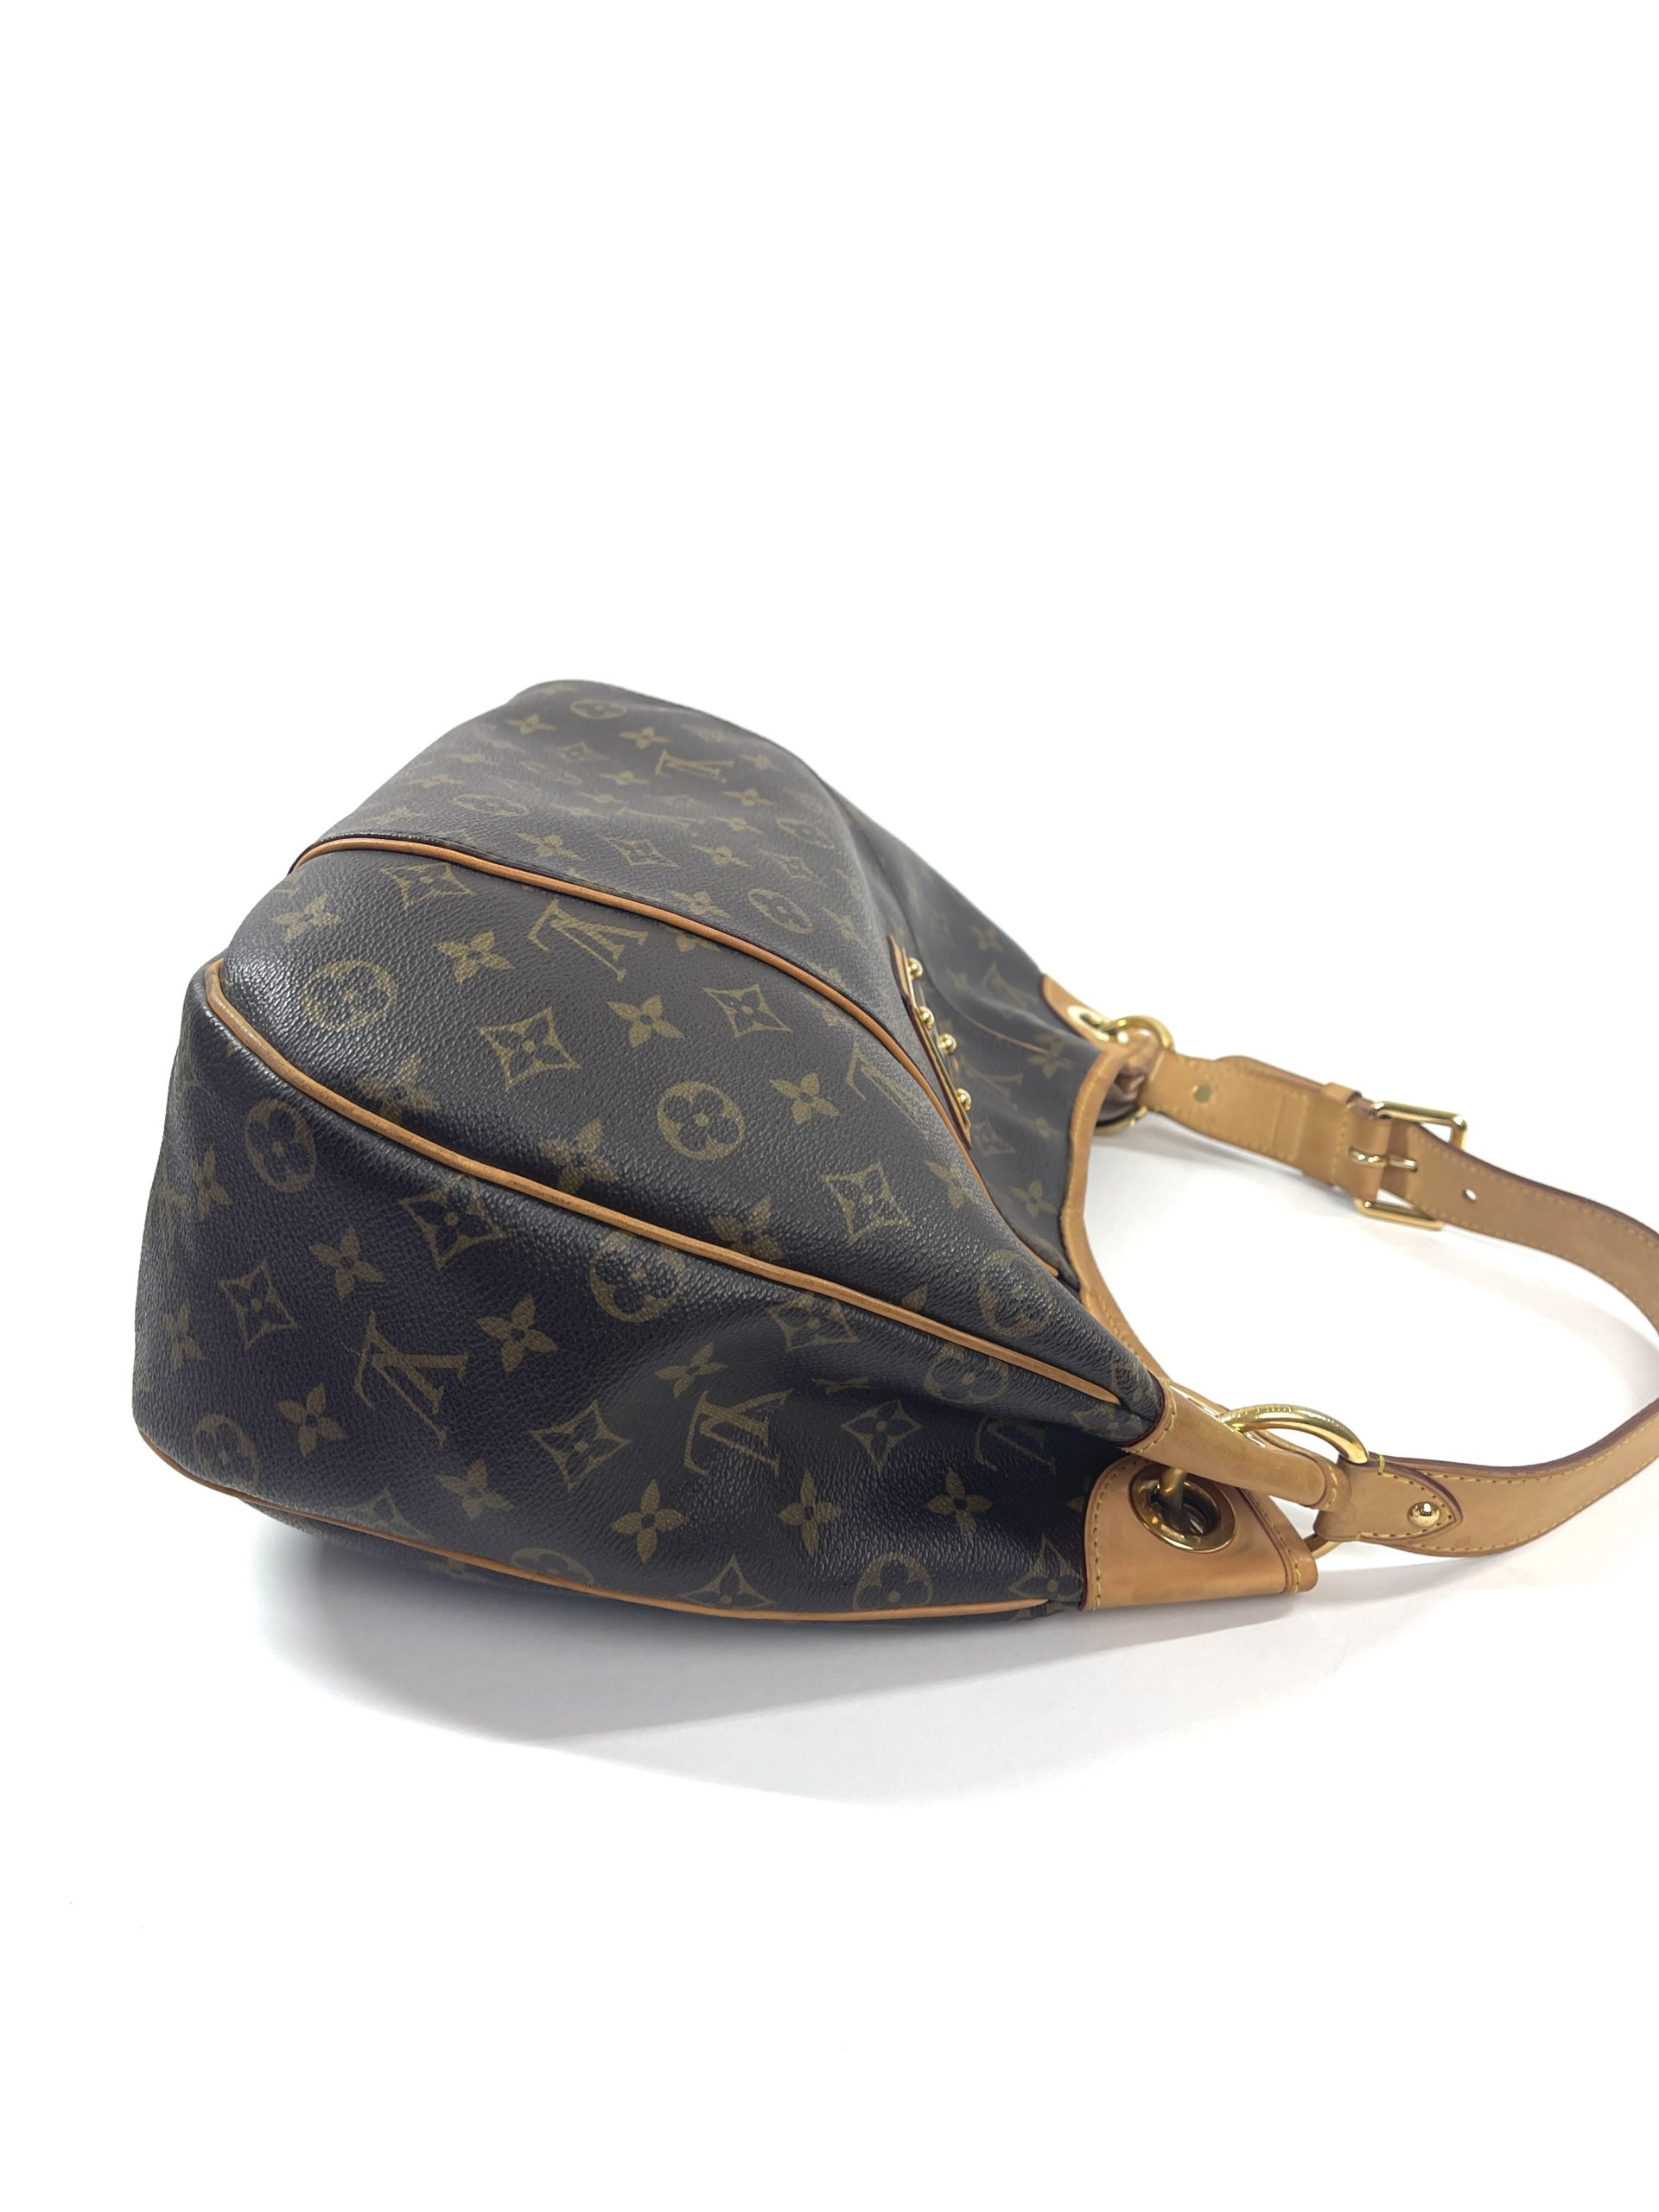 Louis Vuitton Galliera PM vs Delightful PM: Review and Side-by